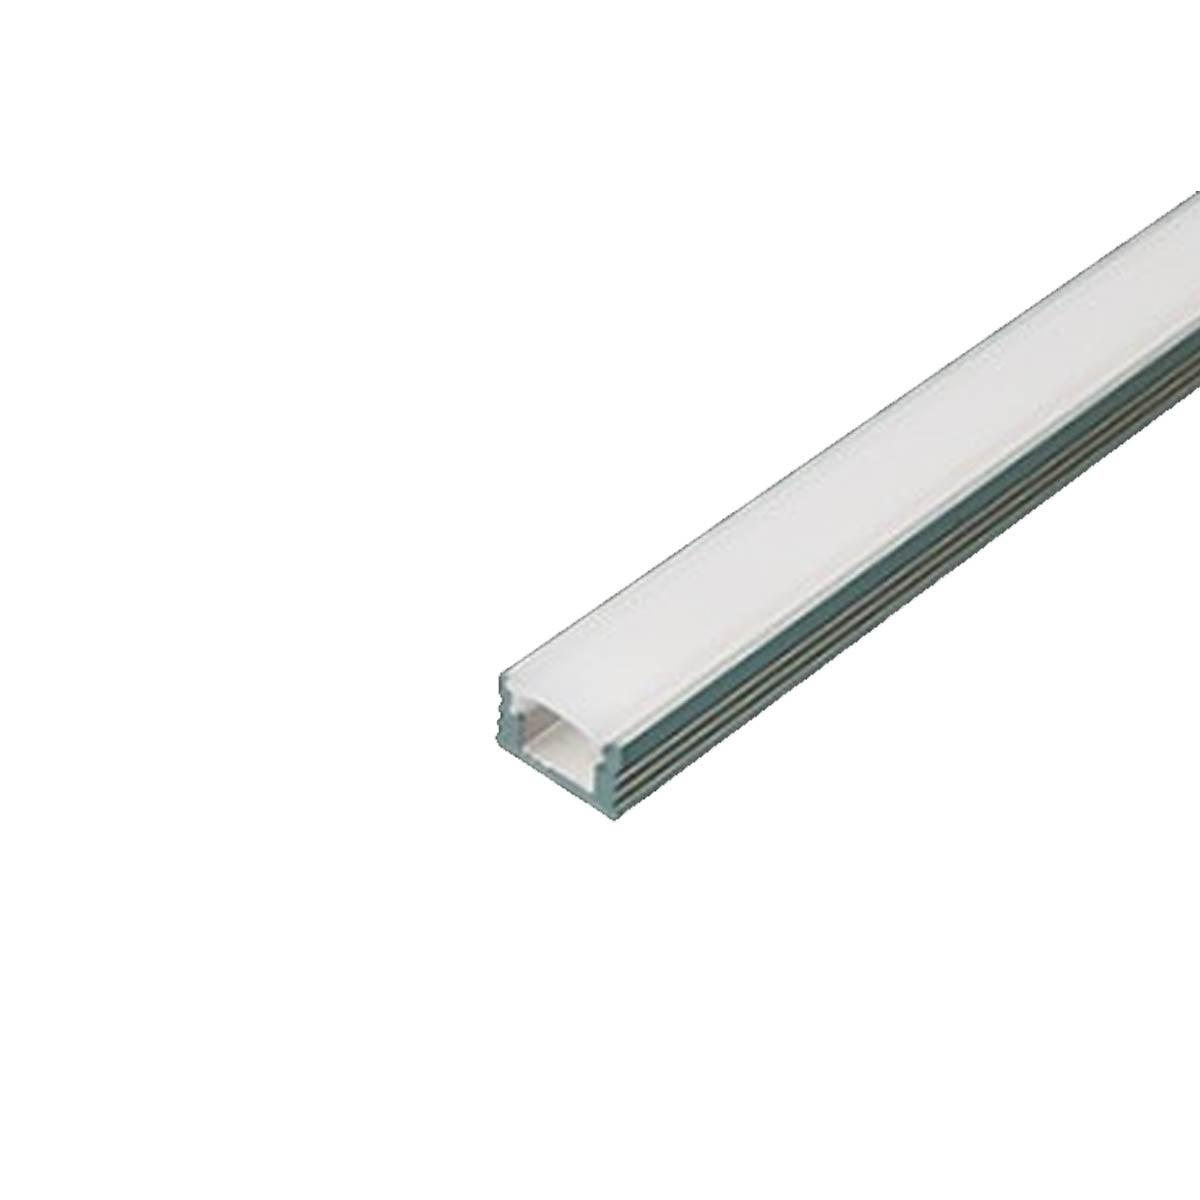 Two End Caps for LED-CHL 4ft or 8ft Channels - Bees Lighting